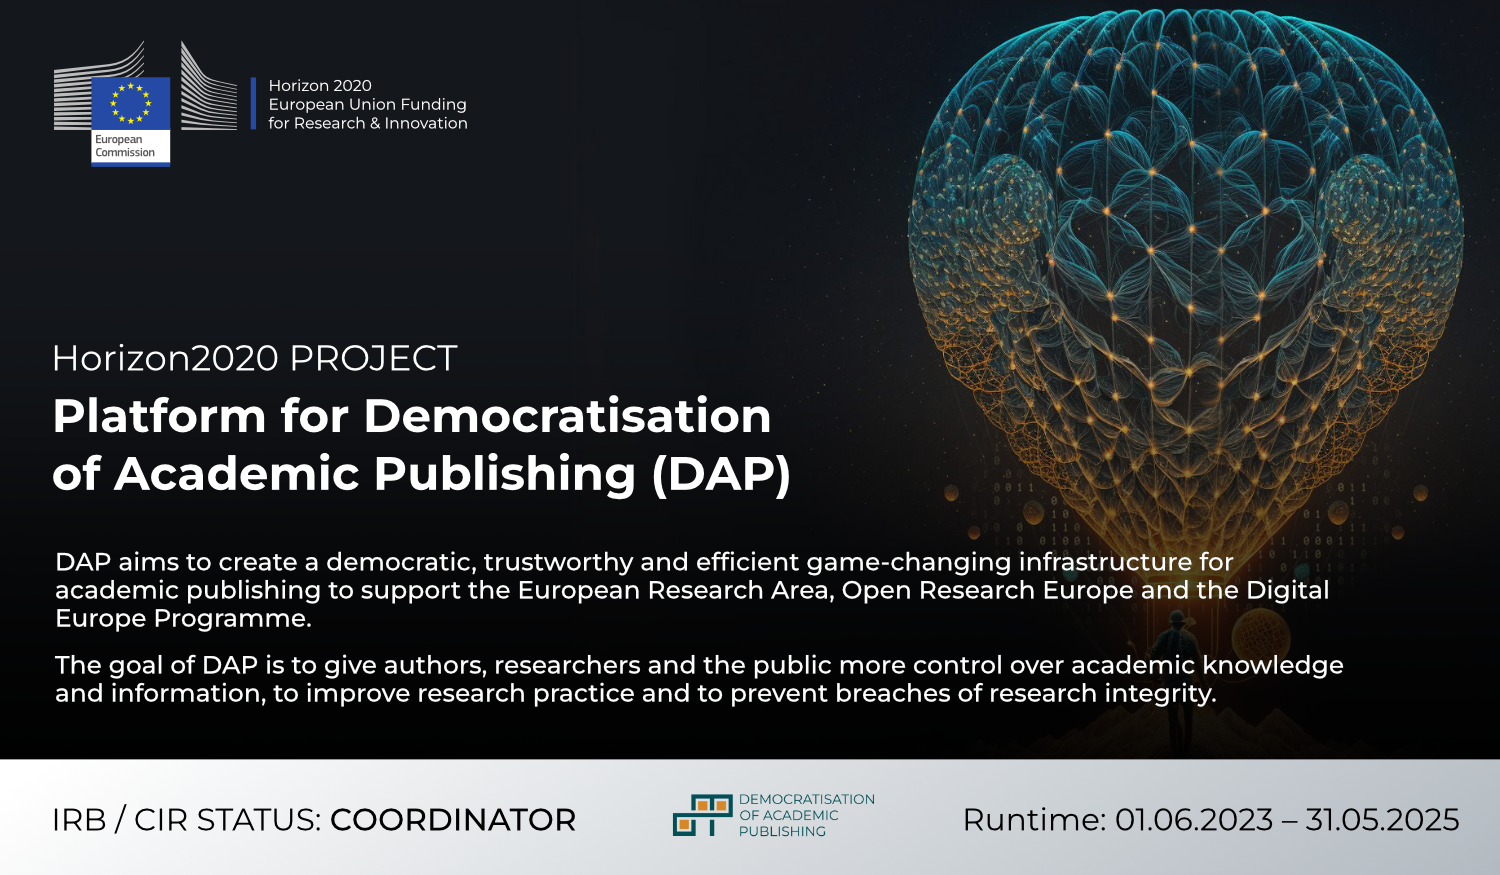 CIR coordinates the establishment of a new, more reliable and efficient ecosystem for scientific publishing through the project "Platform for Democratisation of Academic Publishing (DAP)"